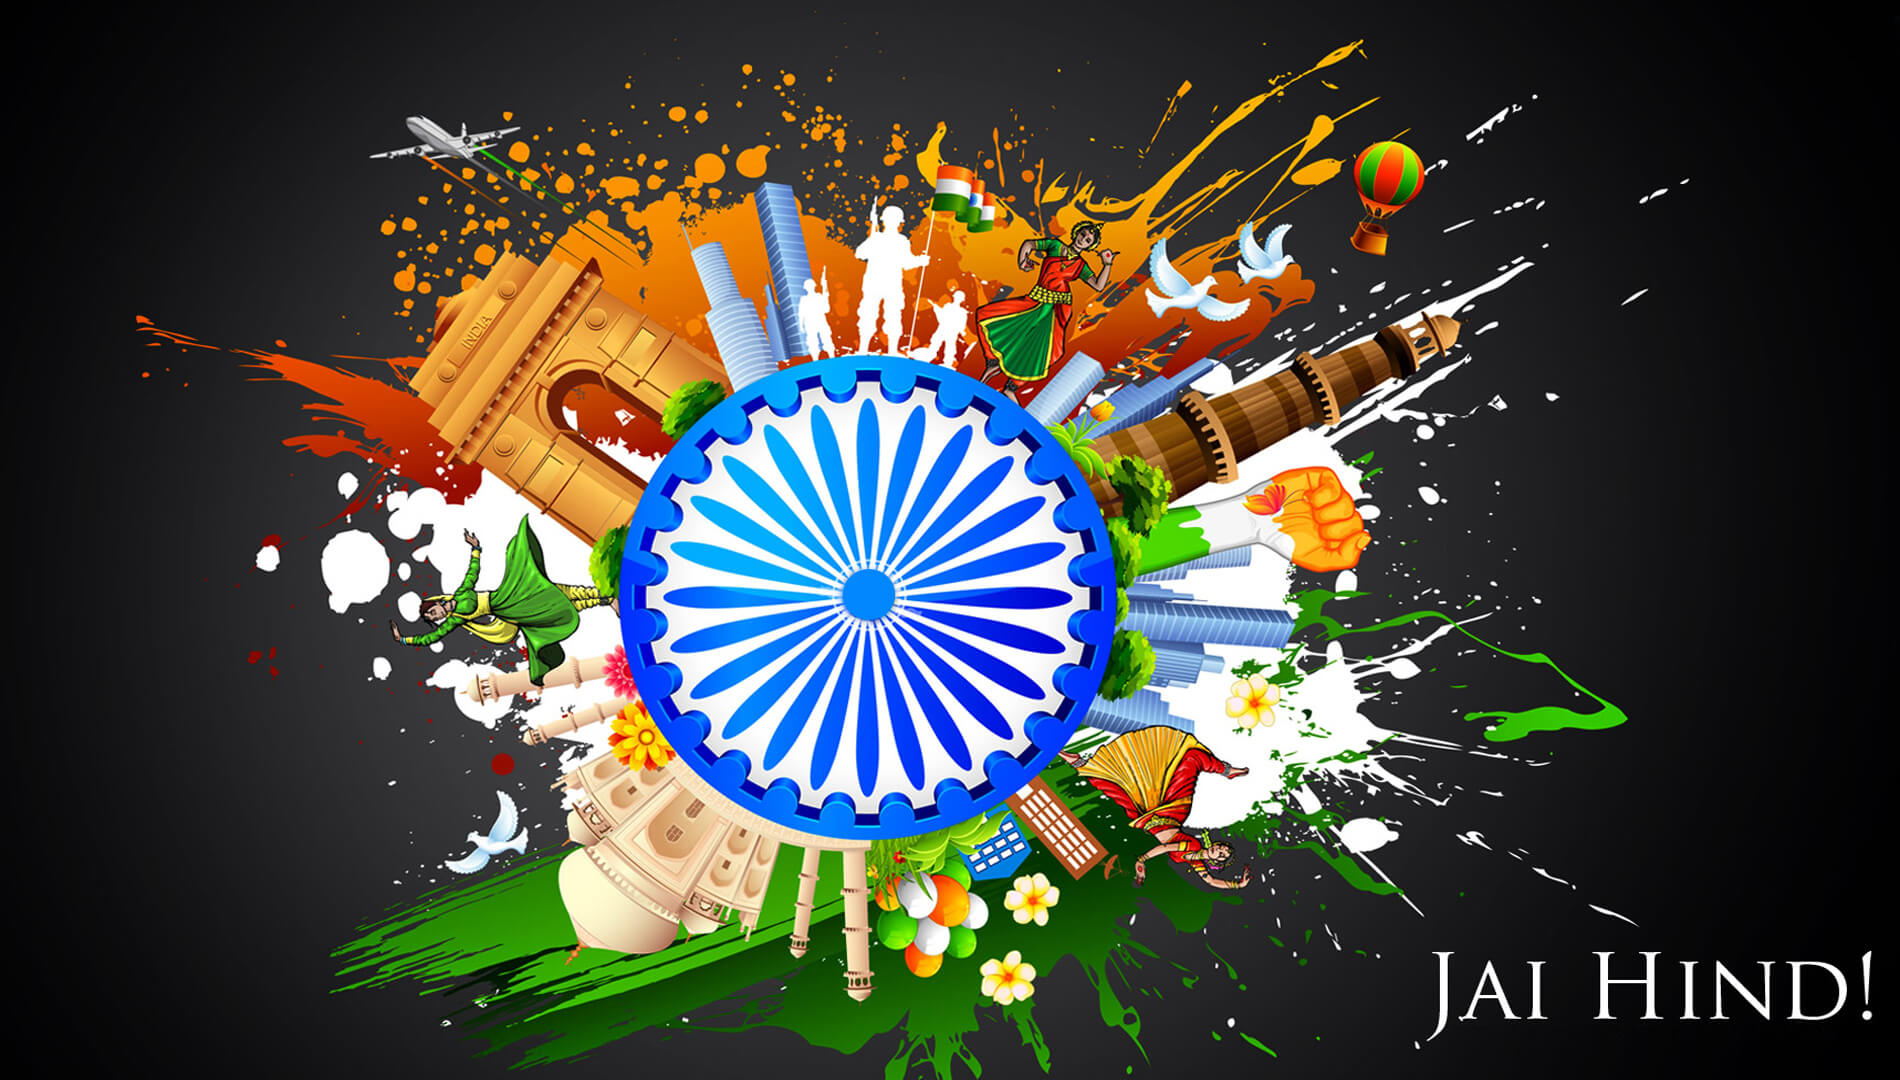 India Independence Day 15th August Jai Hind Hd Wallpaper - August 15 2017 Independence Day - HD Wallpaper 